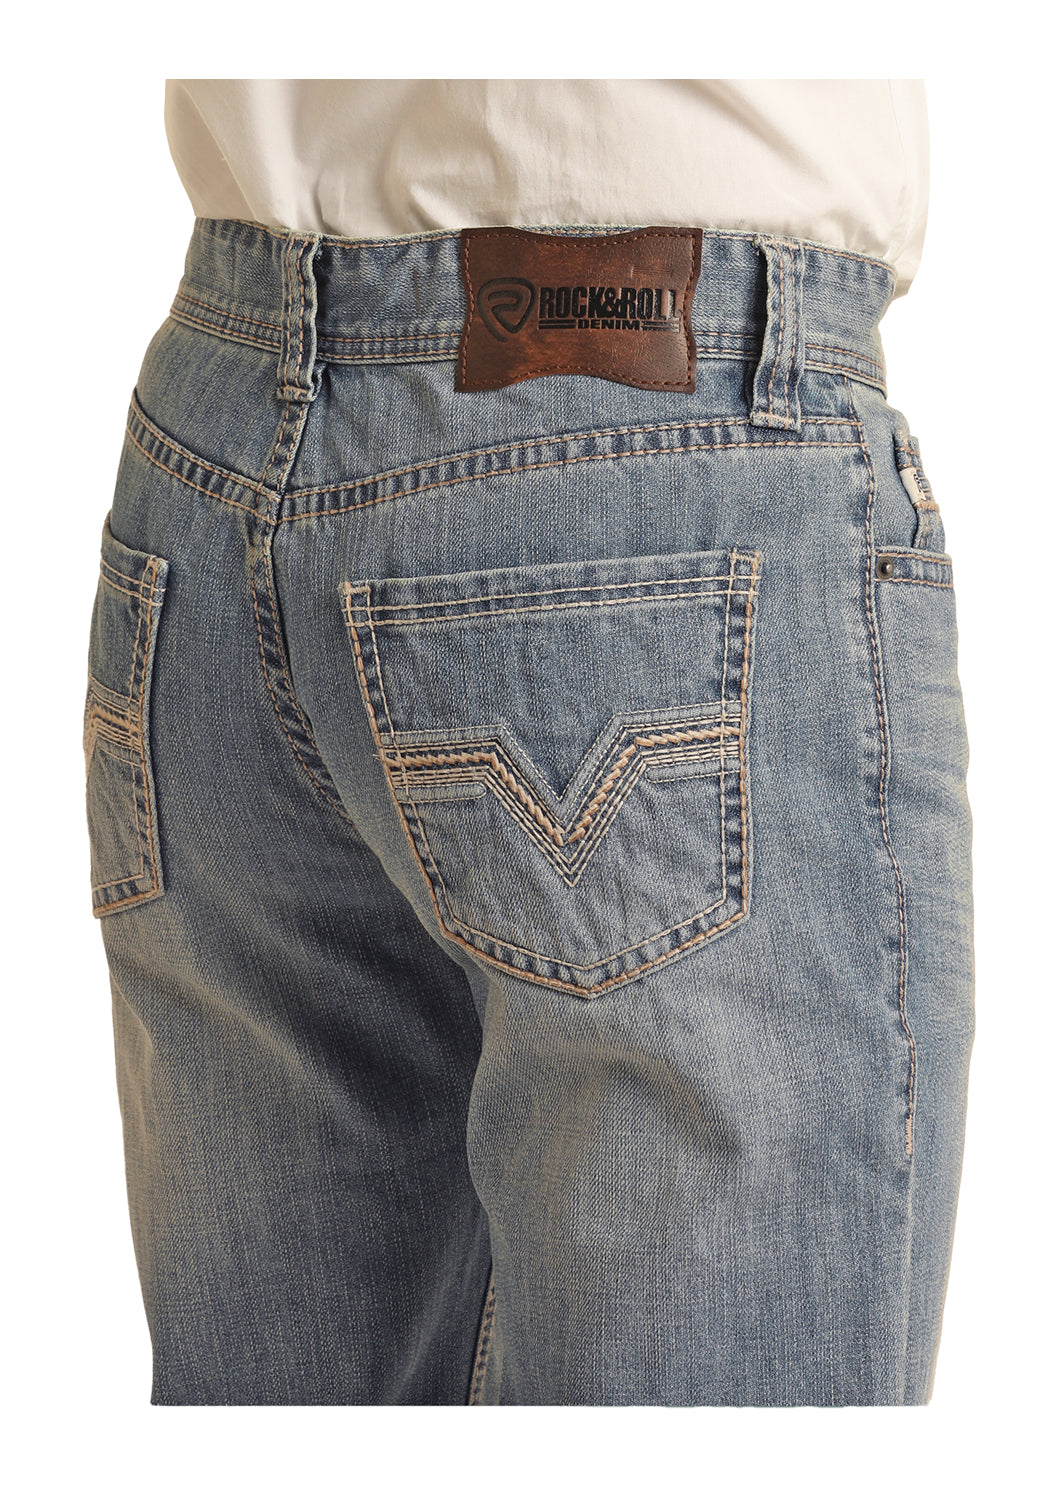 Rock and Roll Men's Double Barrel Medium Vintage Relaxed Stretch Jean